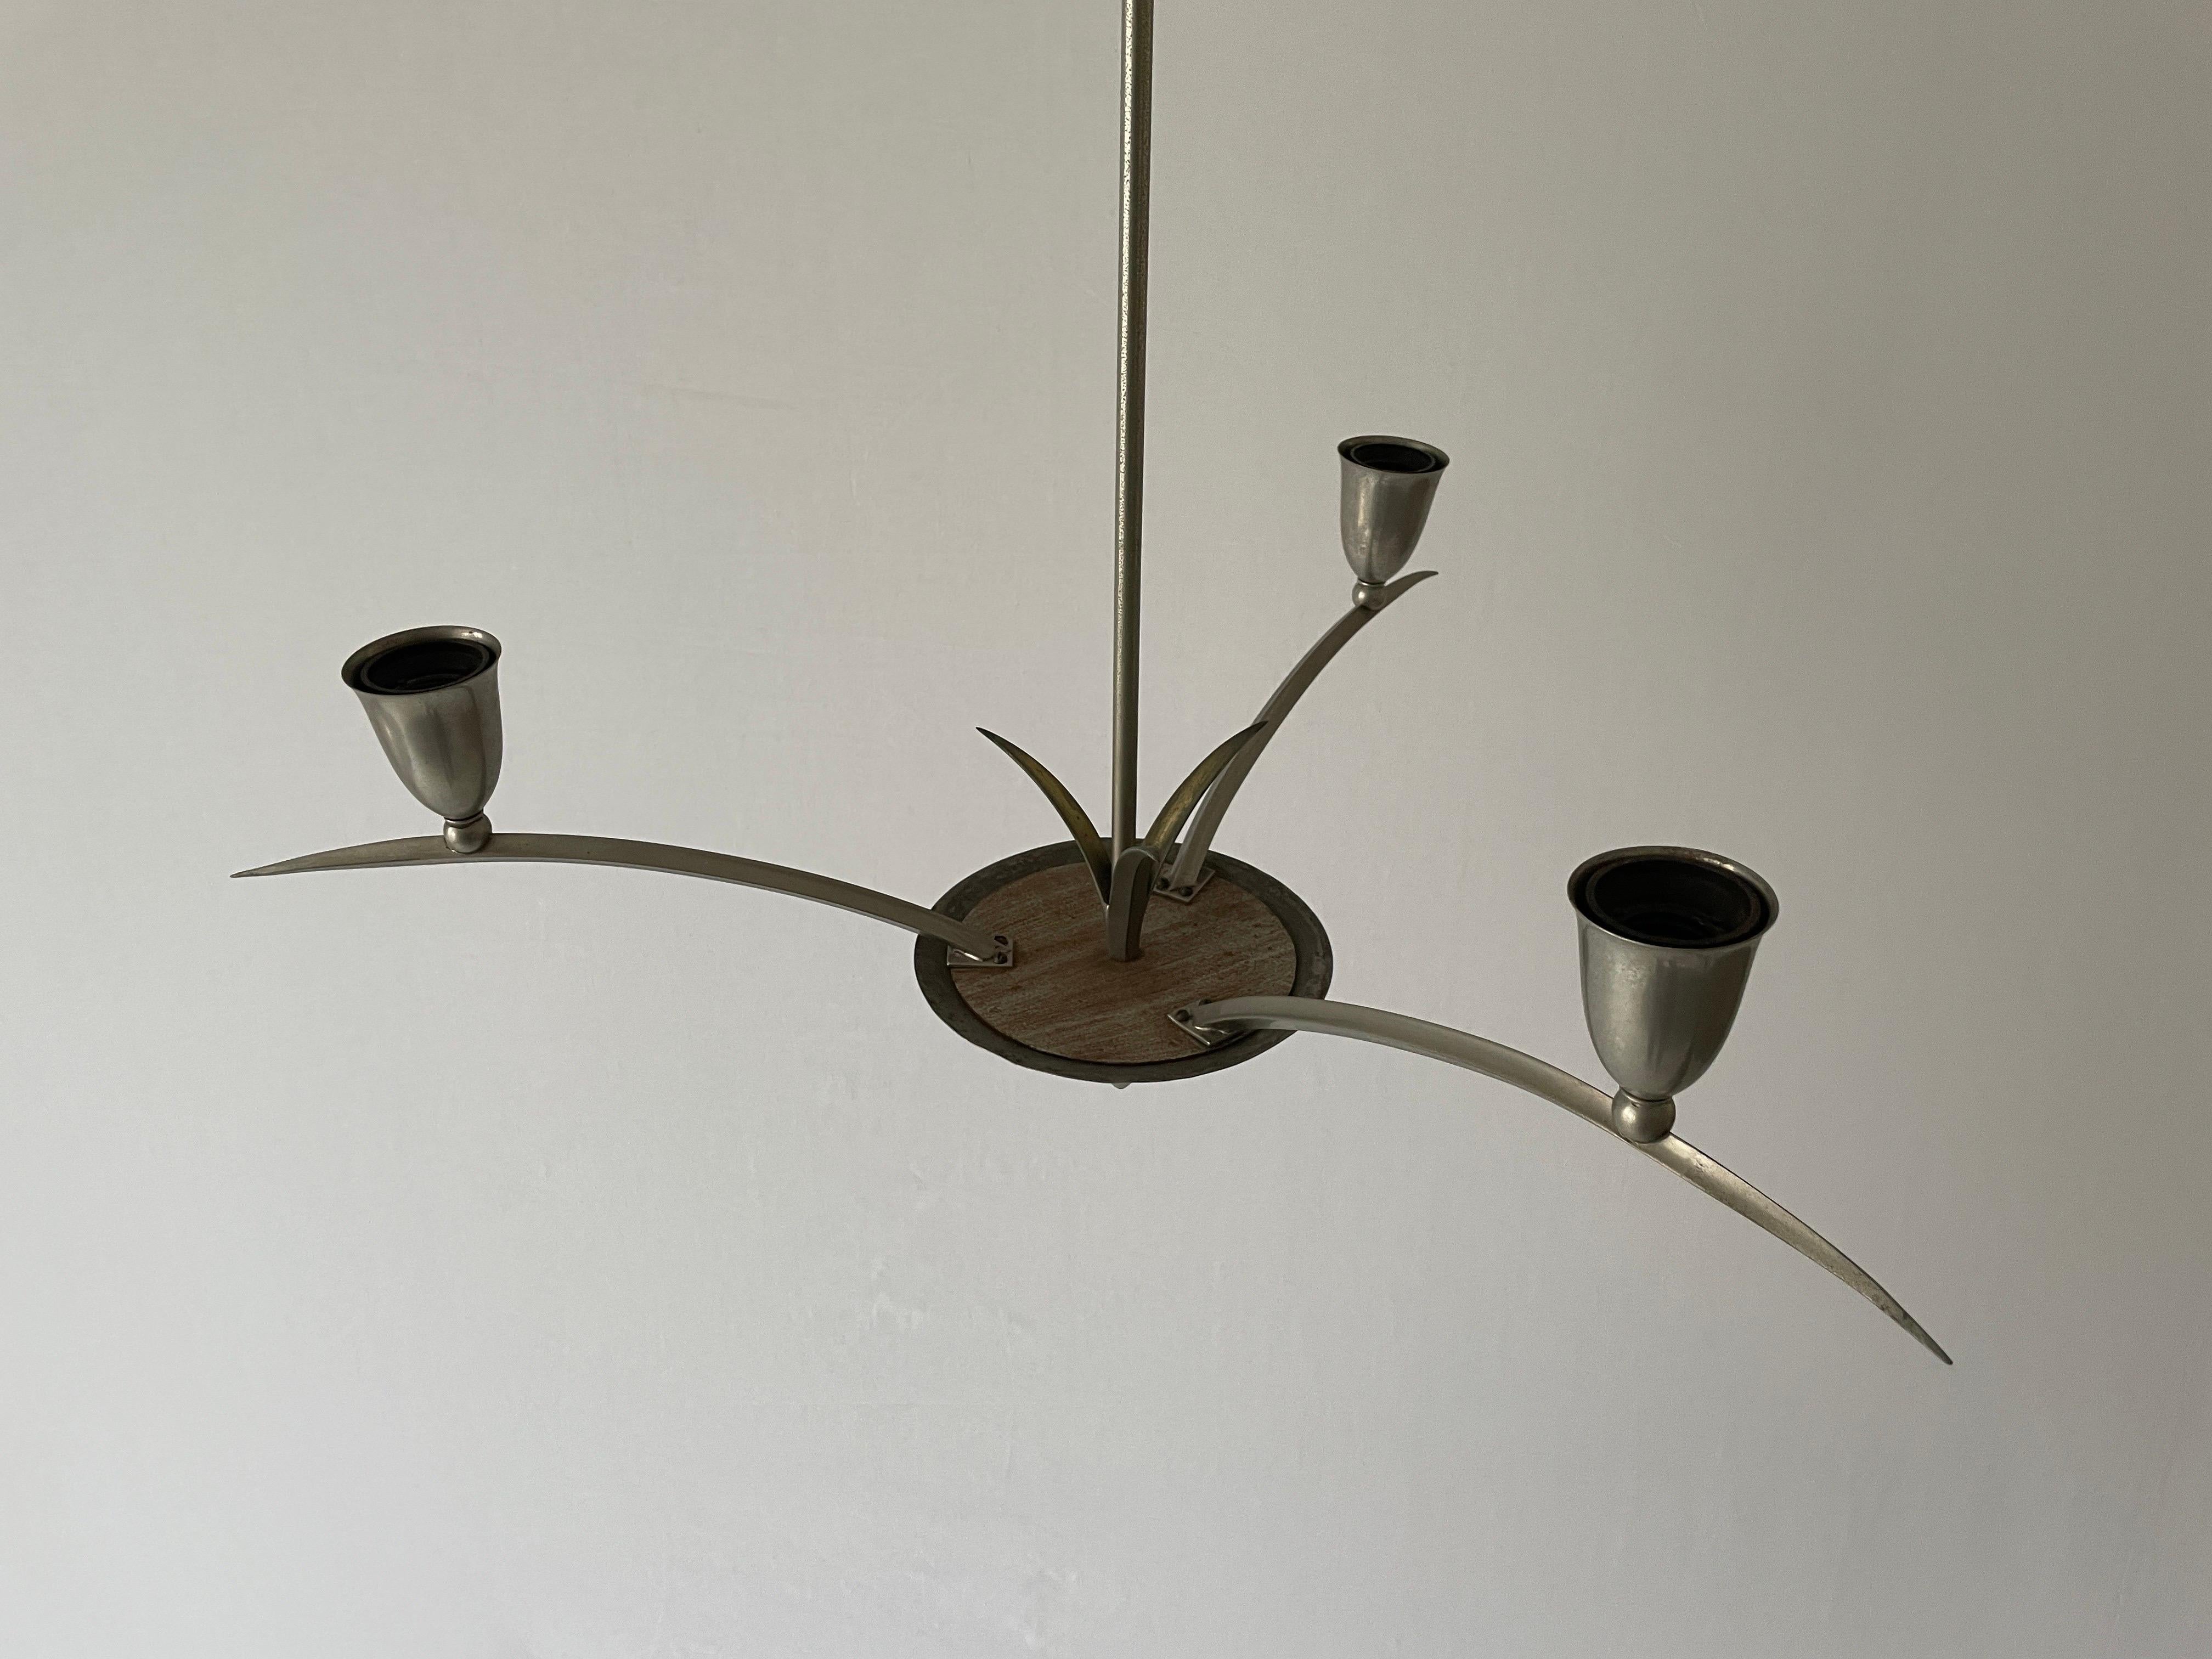 Unusual Leaf-shaped 3 armed Sputnik Chandelier, 40s/50s, France

Lampshade is in very good vintage condition.
No crack, no missed piece.
Original canopy.

This lamp works with 3x E27 light bulbs
Wired and suitable to use with 220V and 110V for all